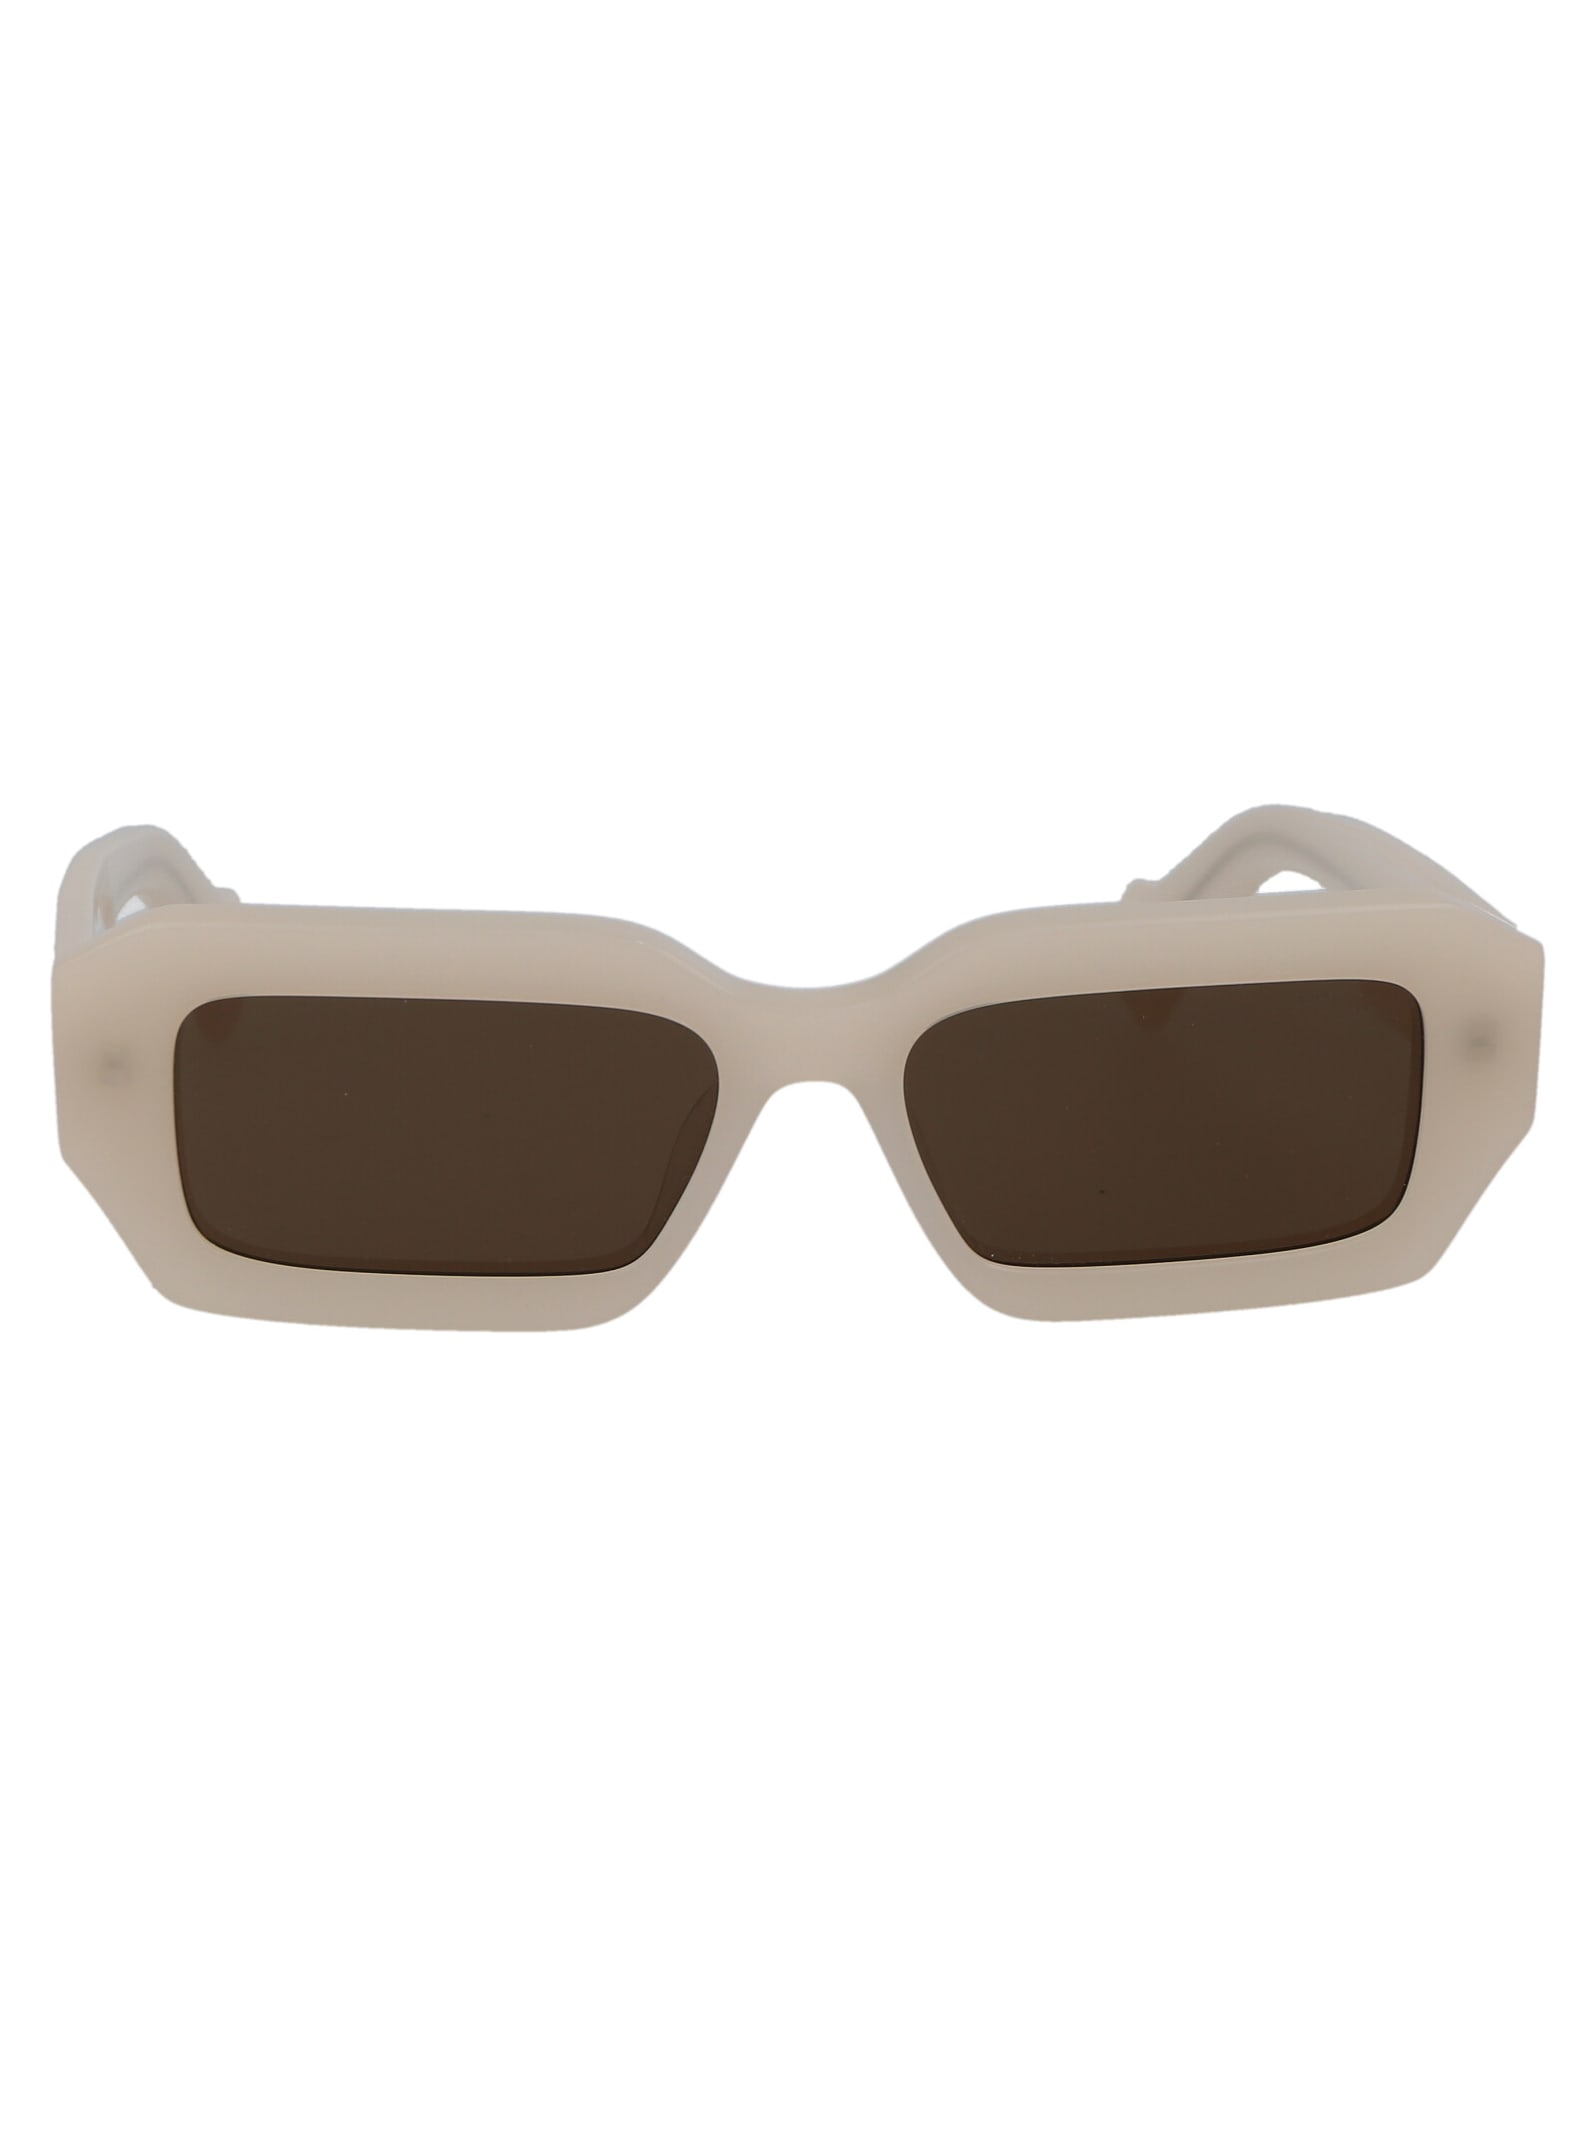 Marcelo Burlon County Of Milan Agave Sunglasses In 1764 Sand Brown